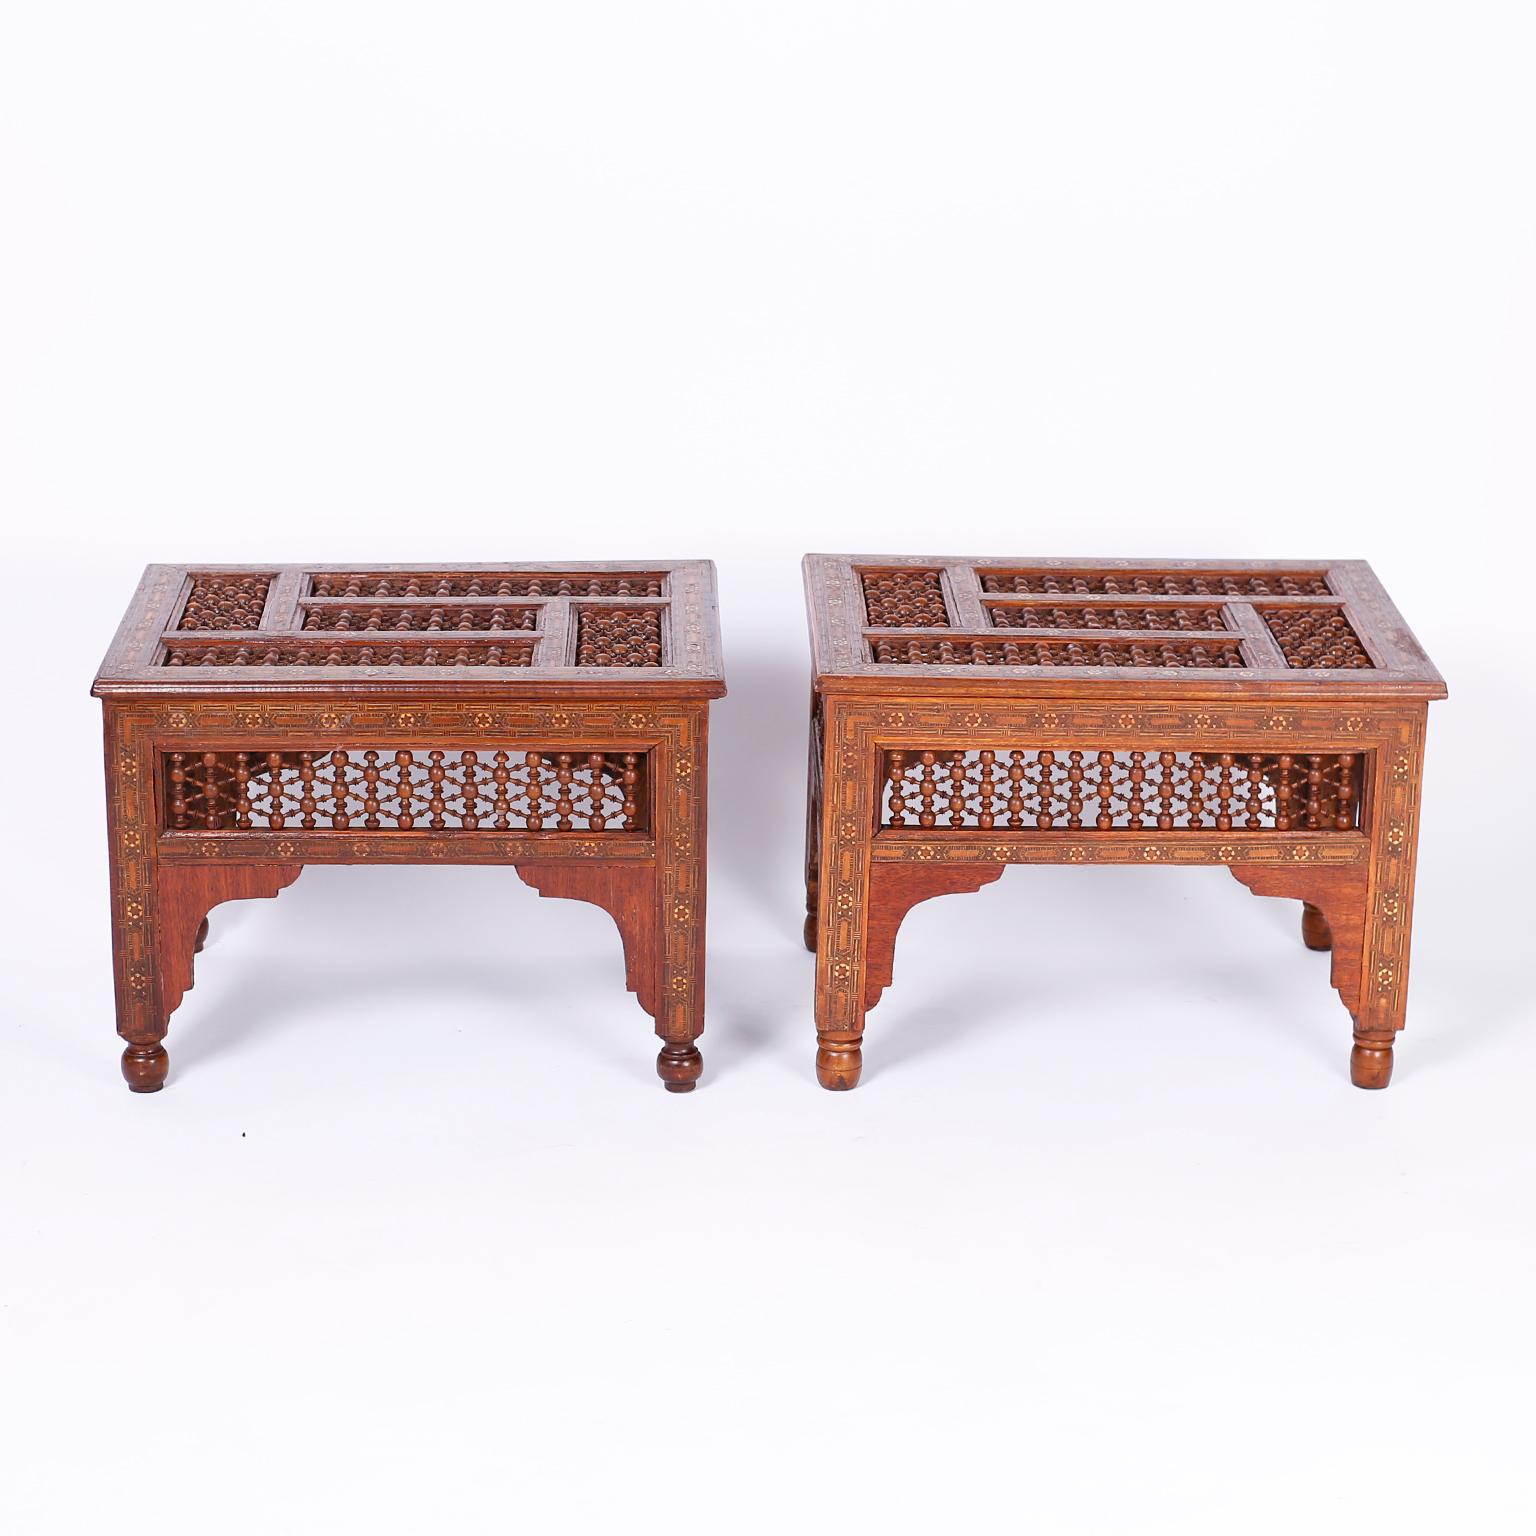 Pair of antique mahogany stands with inlaid bone and exotic hardwoods in geometric designs, stick and ball panels on the top and sides, and four legs with turned feet separated by Moorish arches.